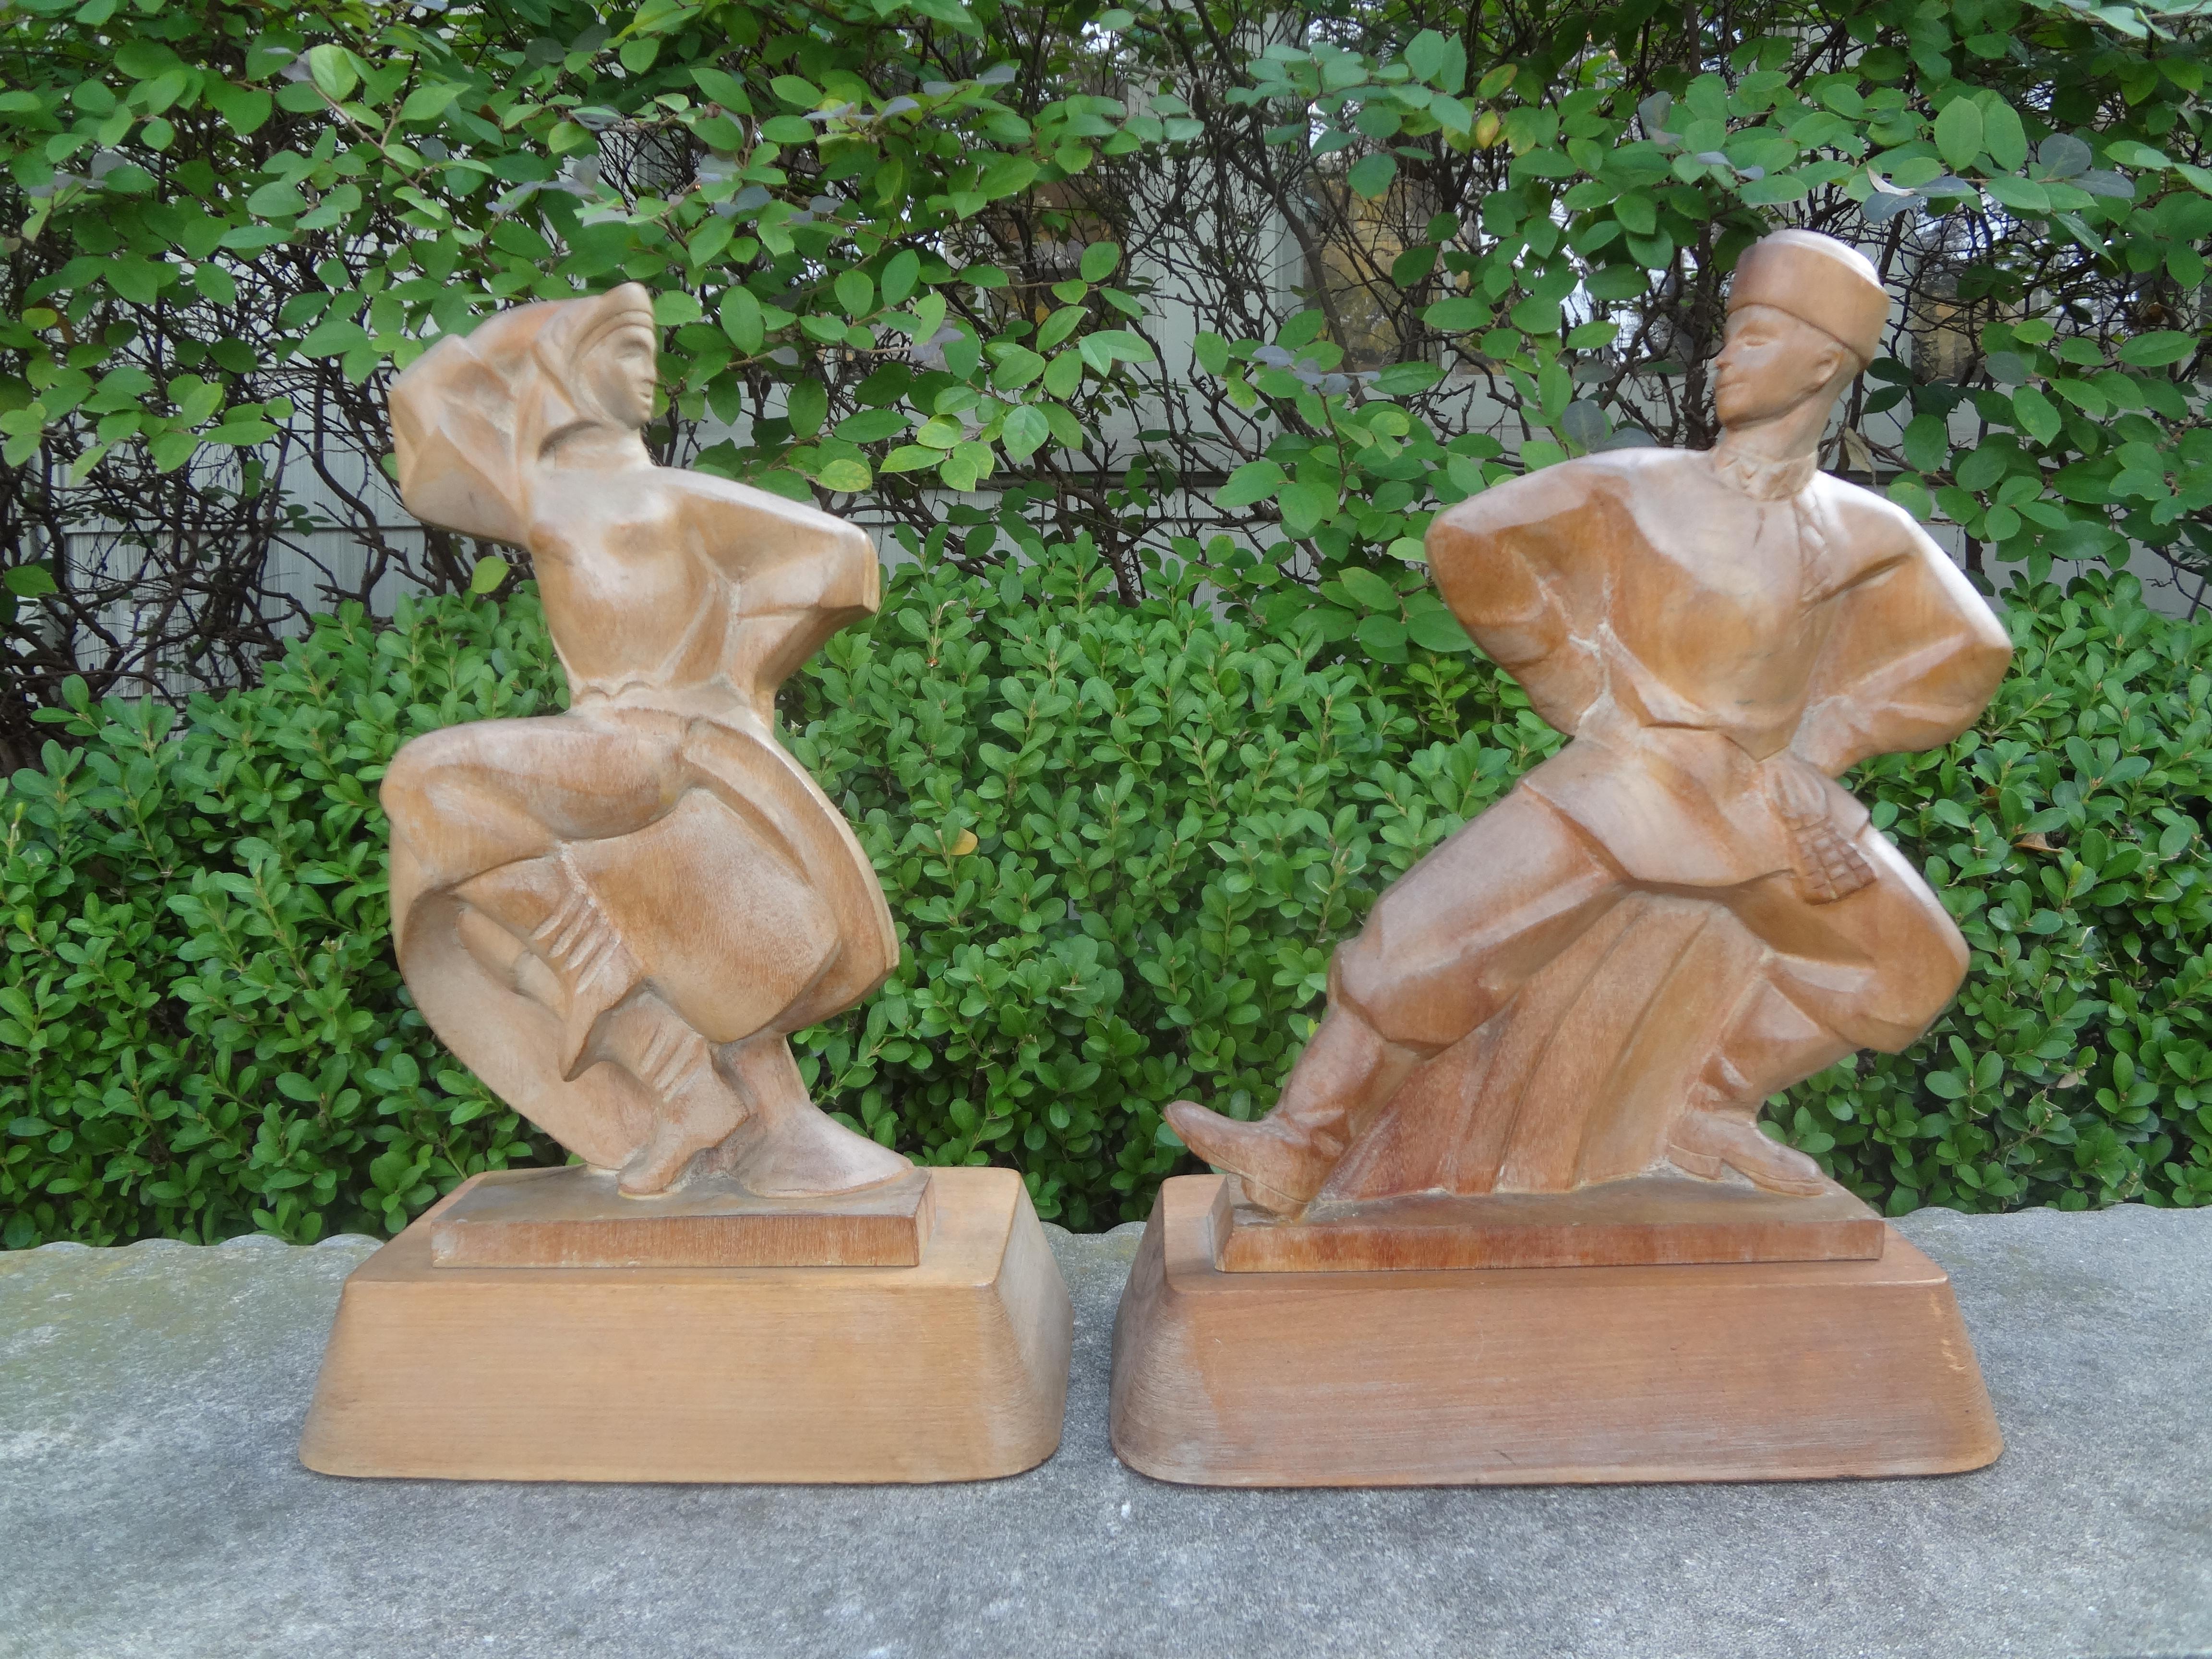 Pair of Heifetz Russian Dancer lamp bases. These lovely Mid-Century Modern hand carved wood lamp bases consist of a male and female Russian Dancers. The pair of Russian dancers are highly collectable and are easy to have wired into a gorgeous pair